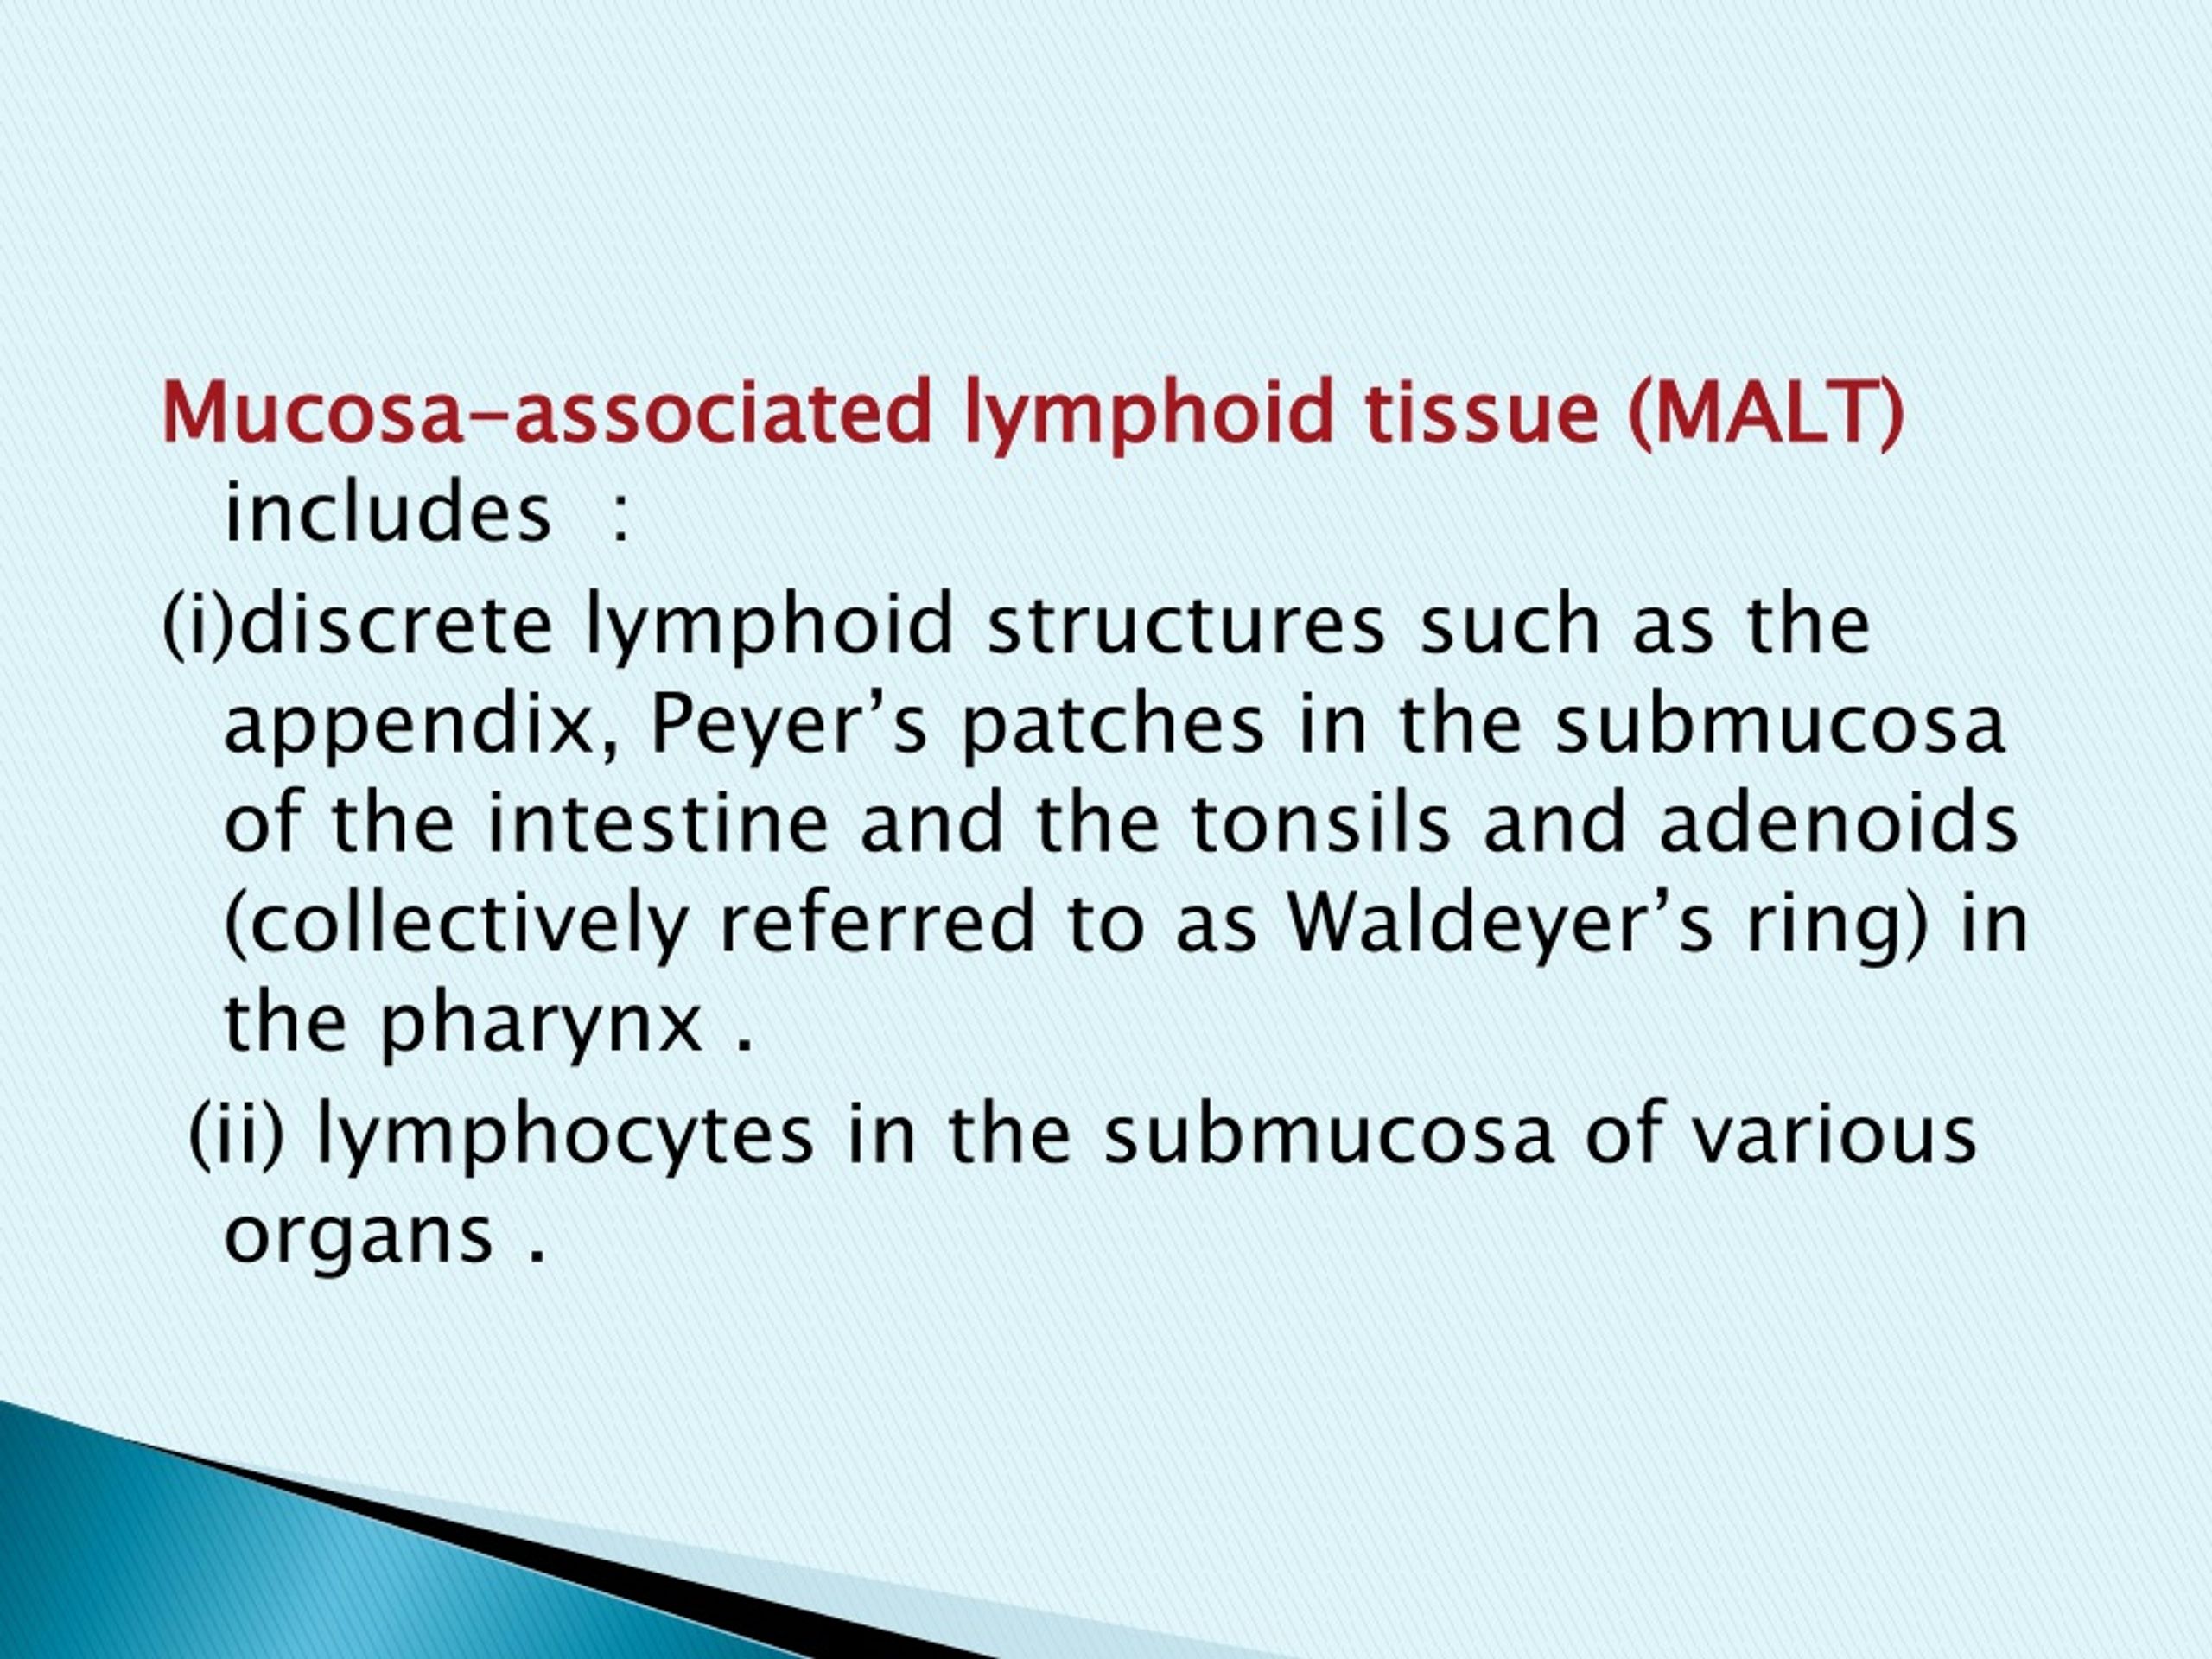 The lymphatic system 3: its role in the immune system | Nursing Times